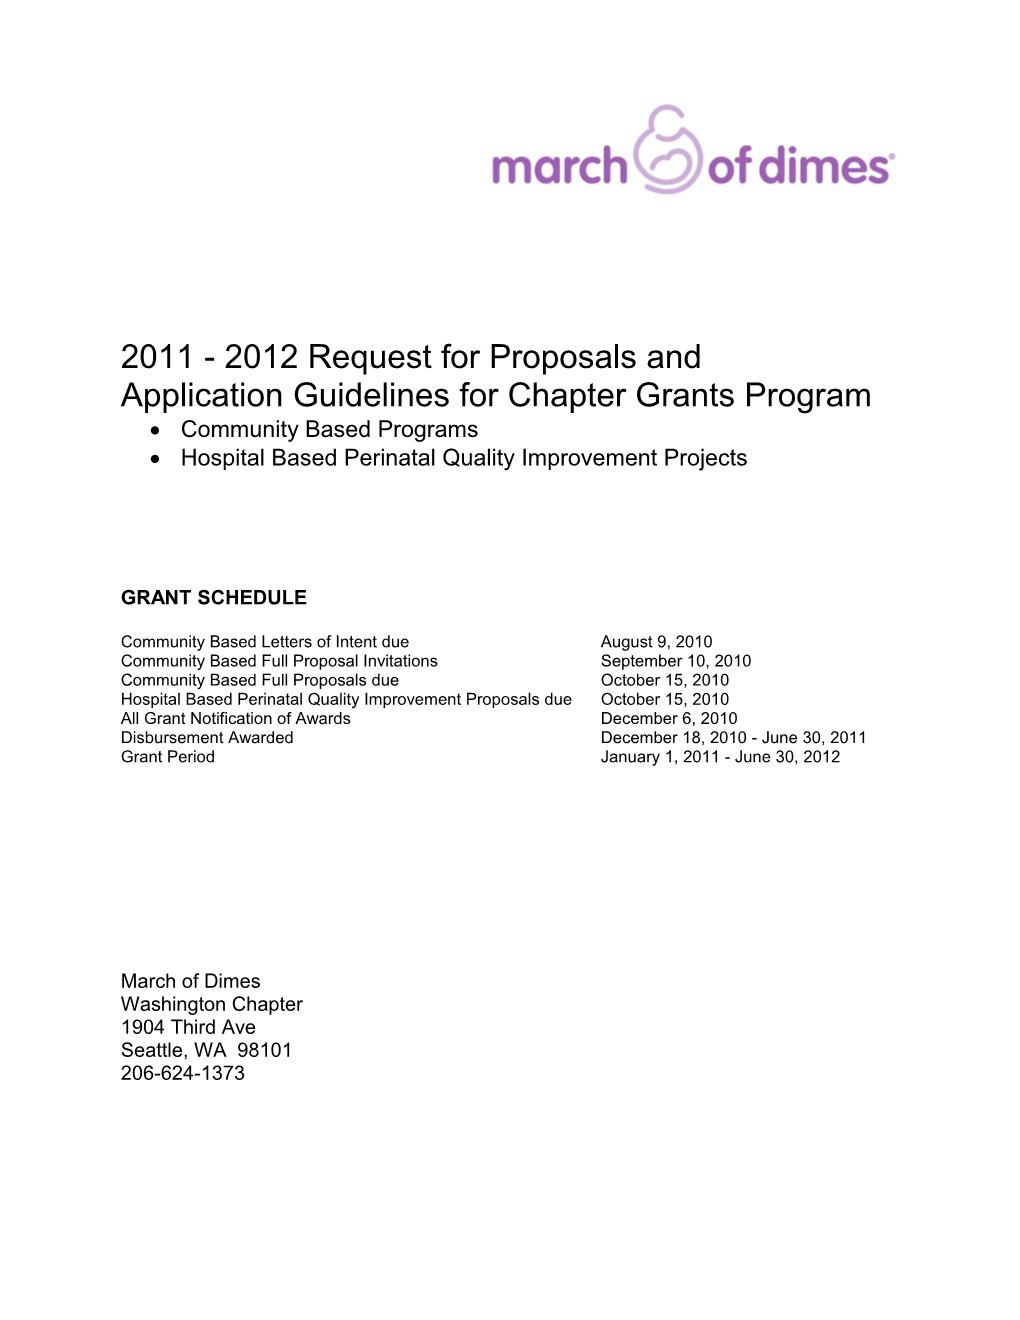 2011 - 2012 Request for Proposals And